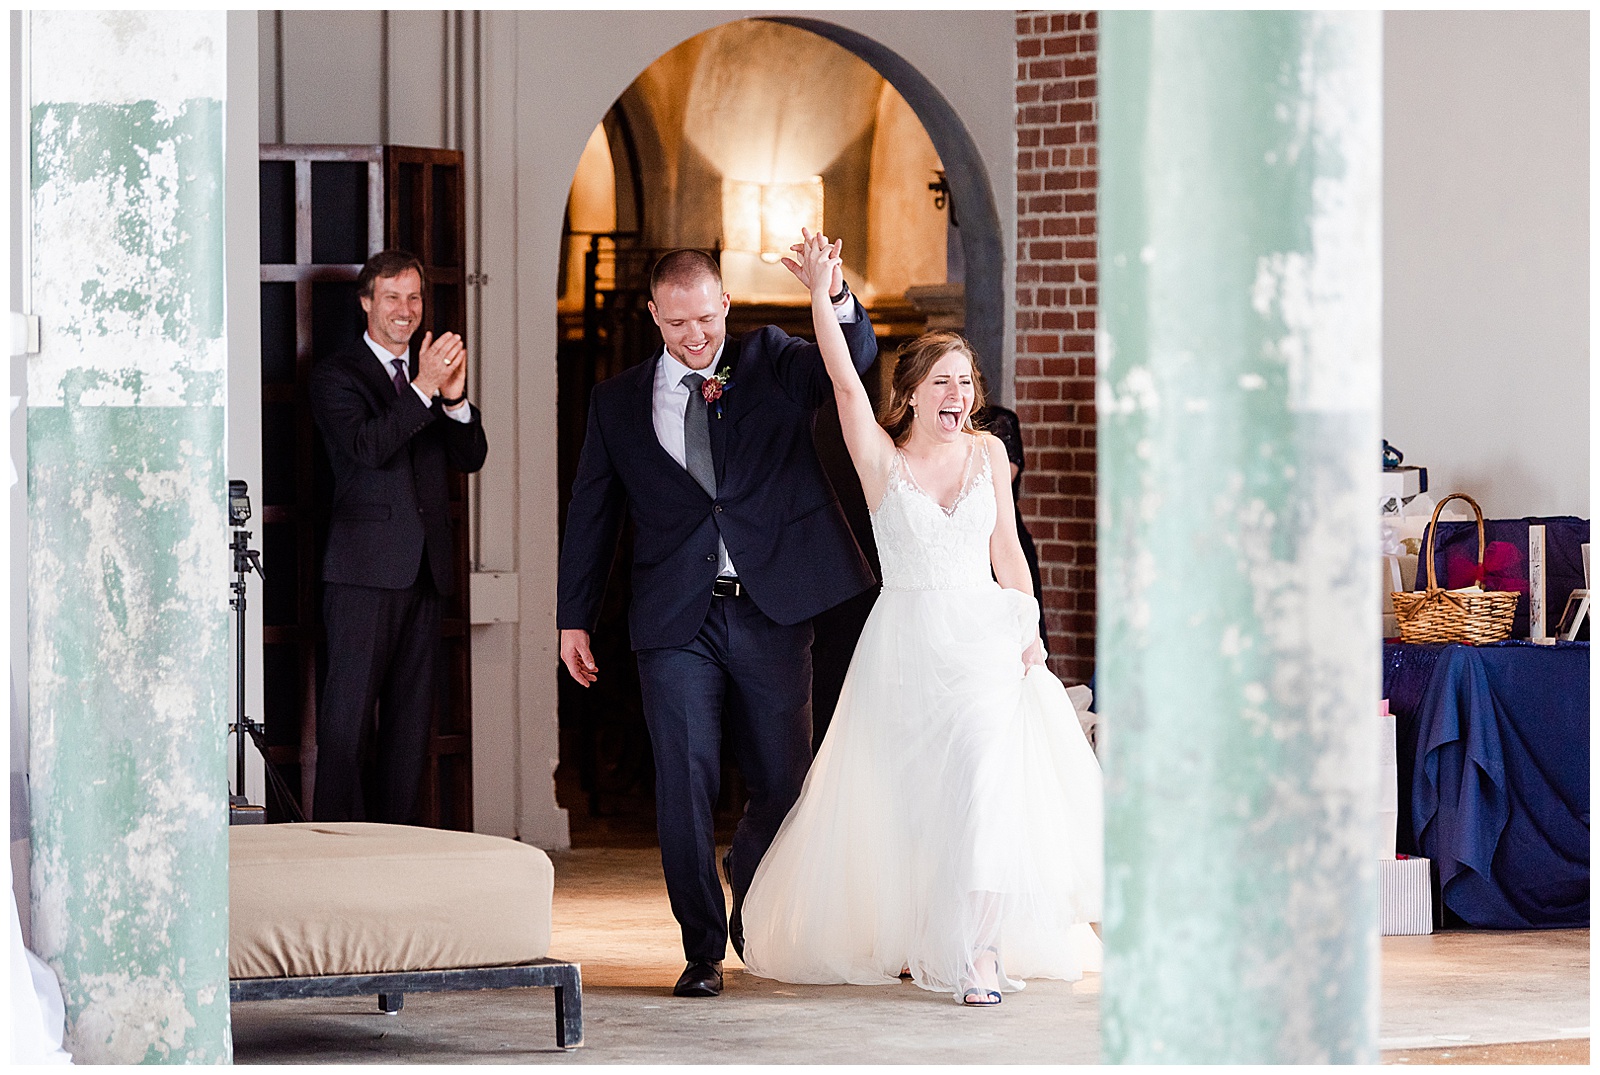 Bride and Groom Arrive at Rustic Airy Indoor Wedding Venue from Navy Blue and Gold-Themed Elegant Modern Summer Wedding in Charlotte, NC | check out the full wedding at KevynDixonPhoto.com